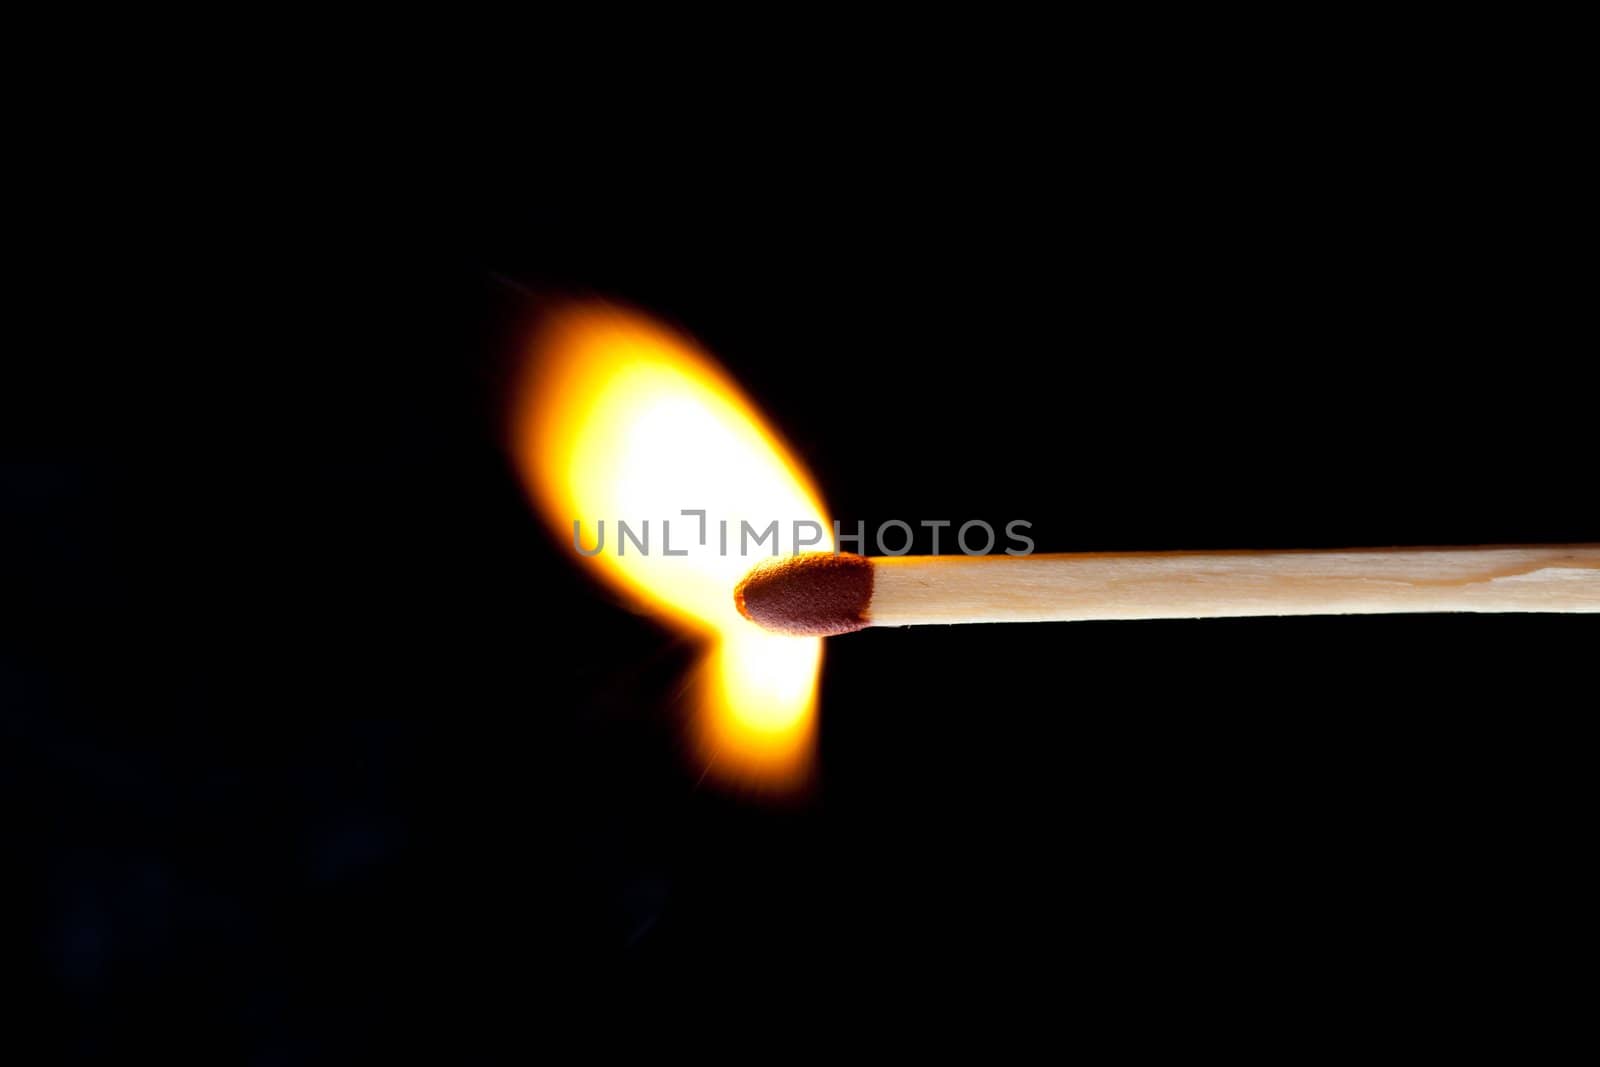 Horizontal match set on fire against a black background